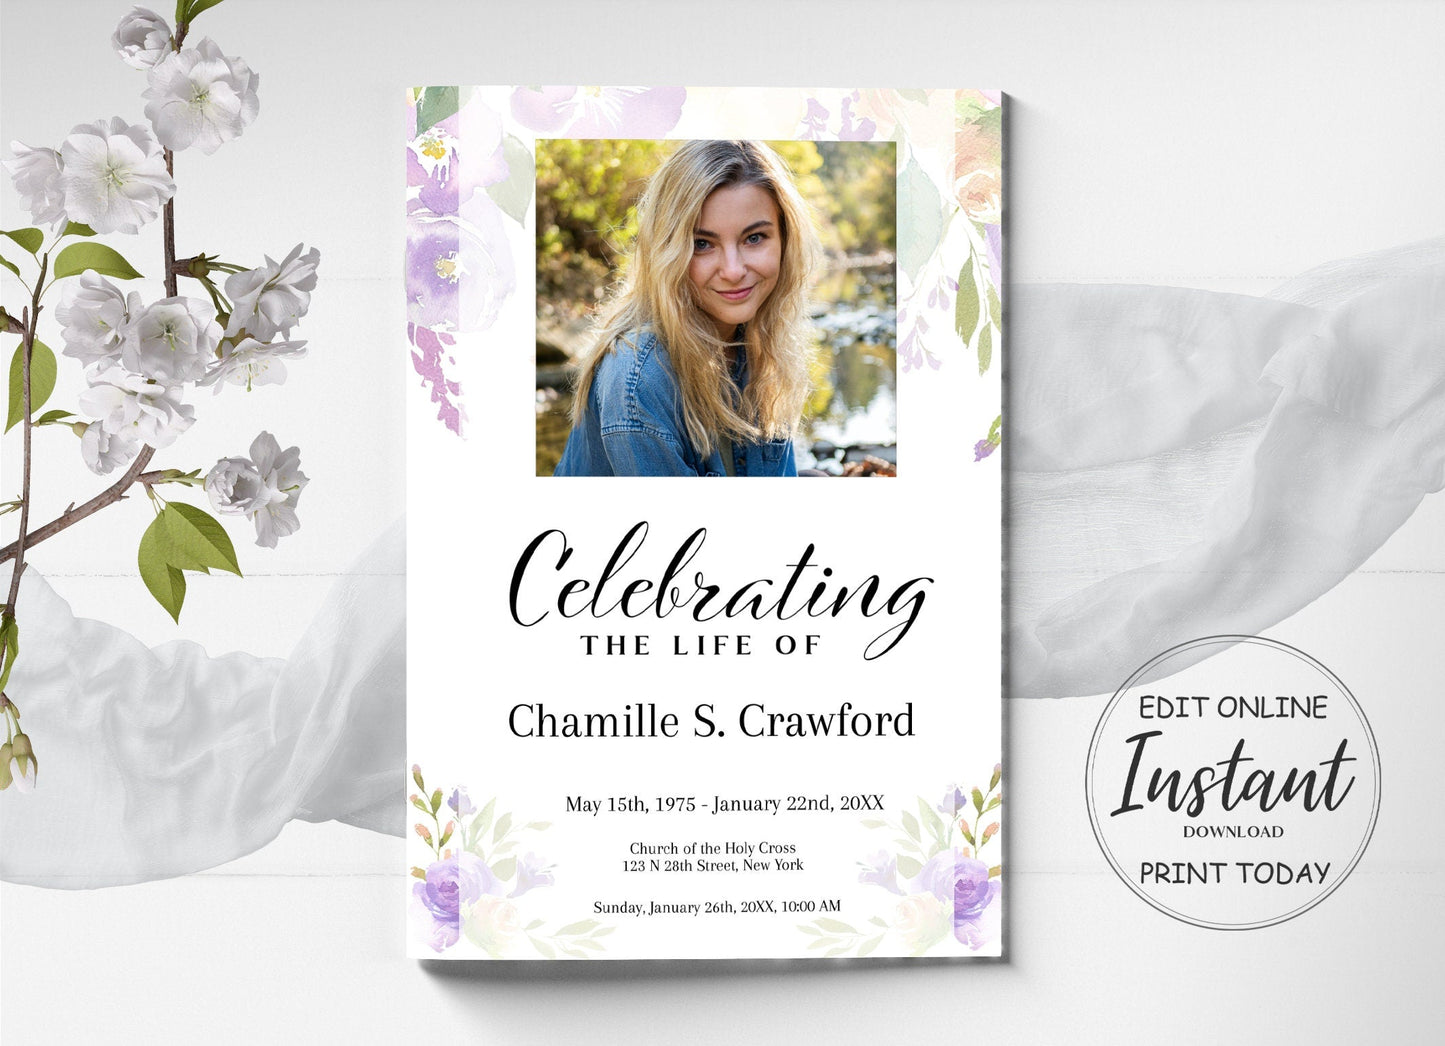 "Celebrating the life of " funeral program template front page